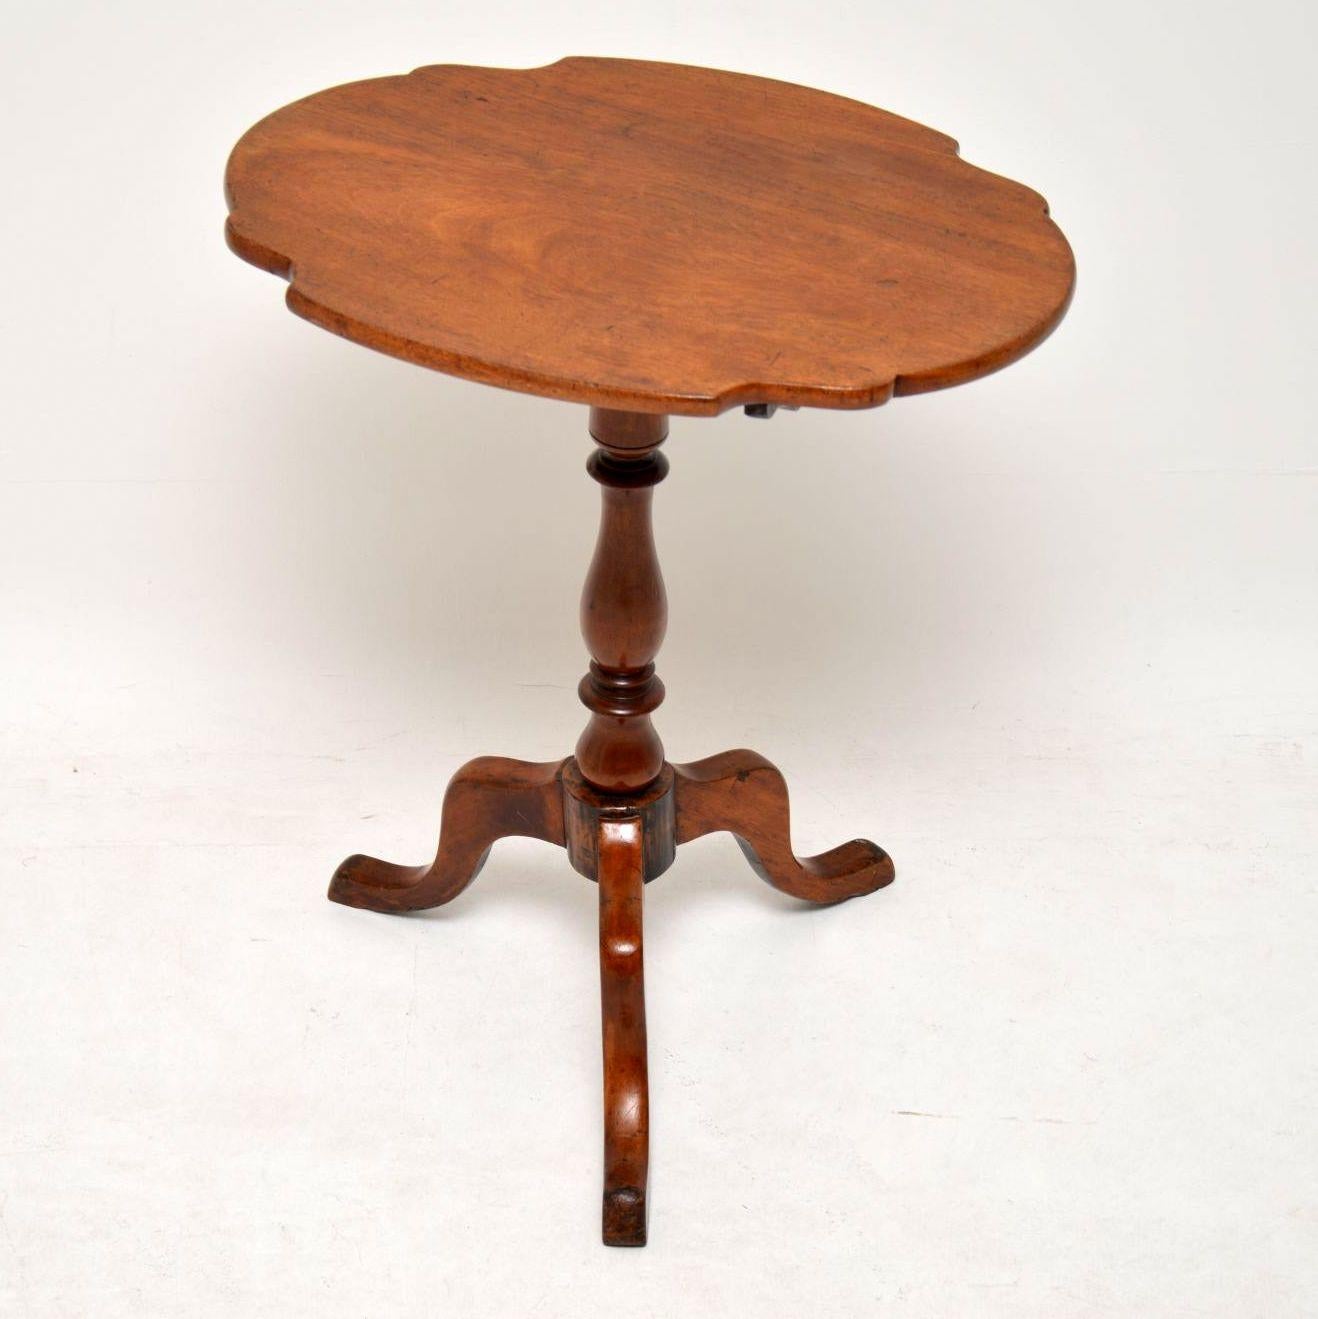 This antique solid mahogany tilt-top table has a lovely color and is full of character. It has a shaped top which can be tilted up and sits on a turned column with tripod legs. I can’t work out if it’s Georgian or Victorian, so lets say it’s from